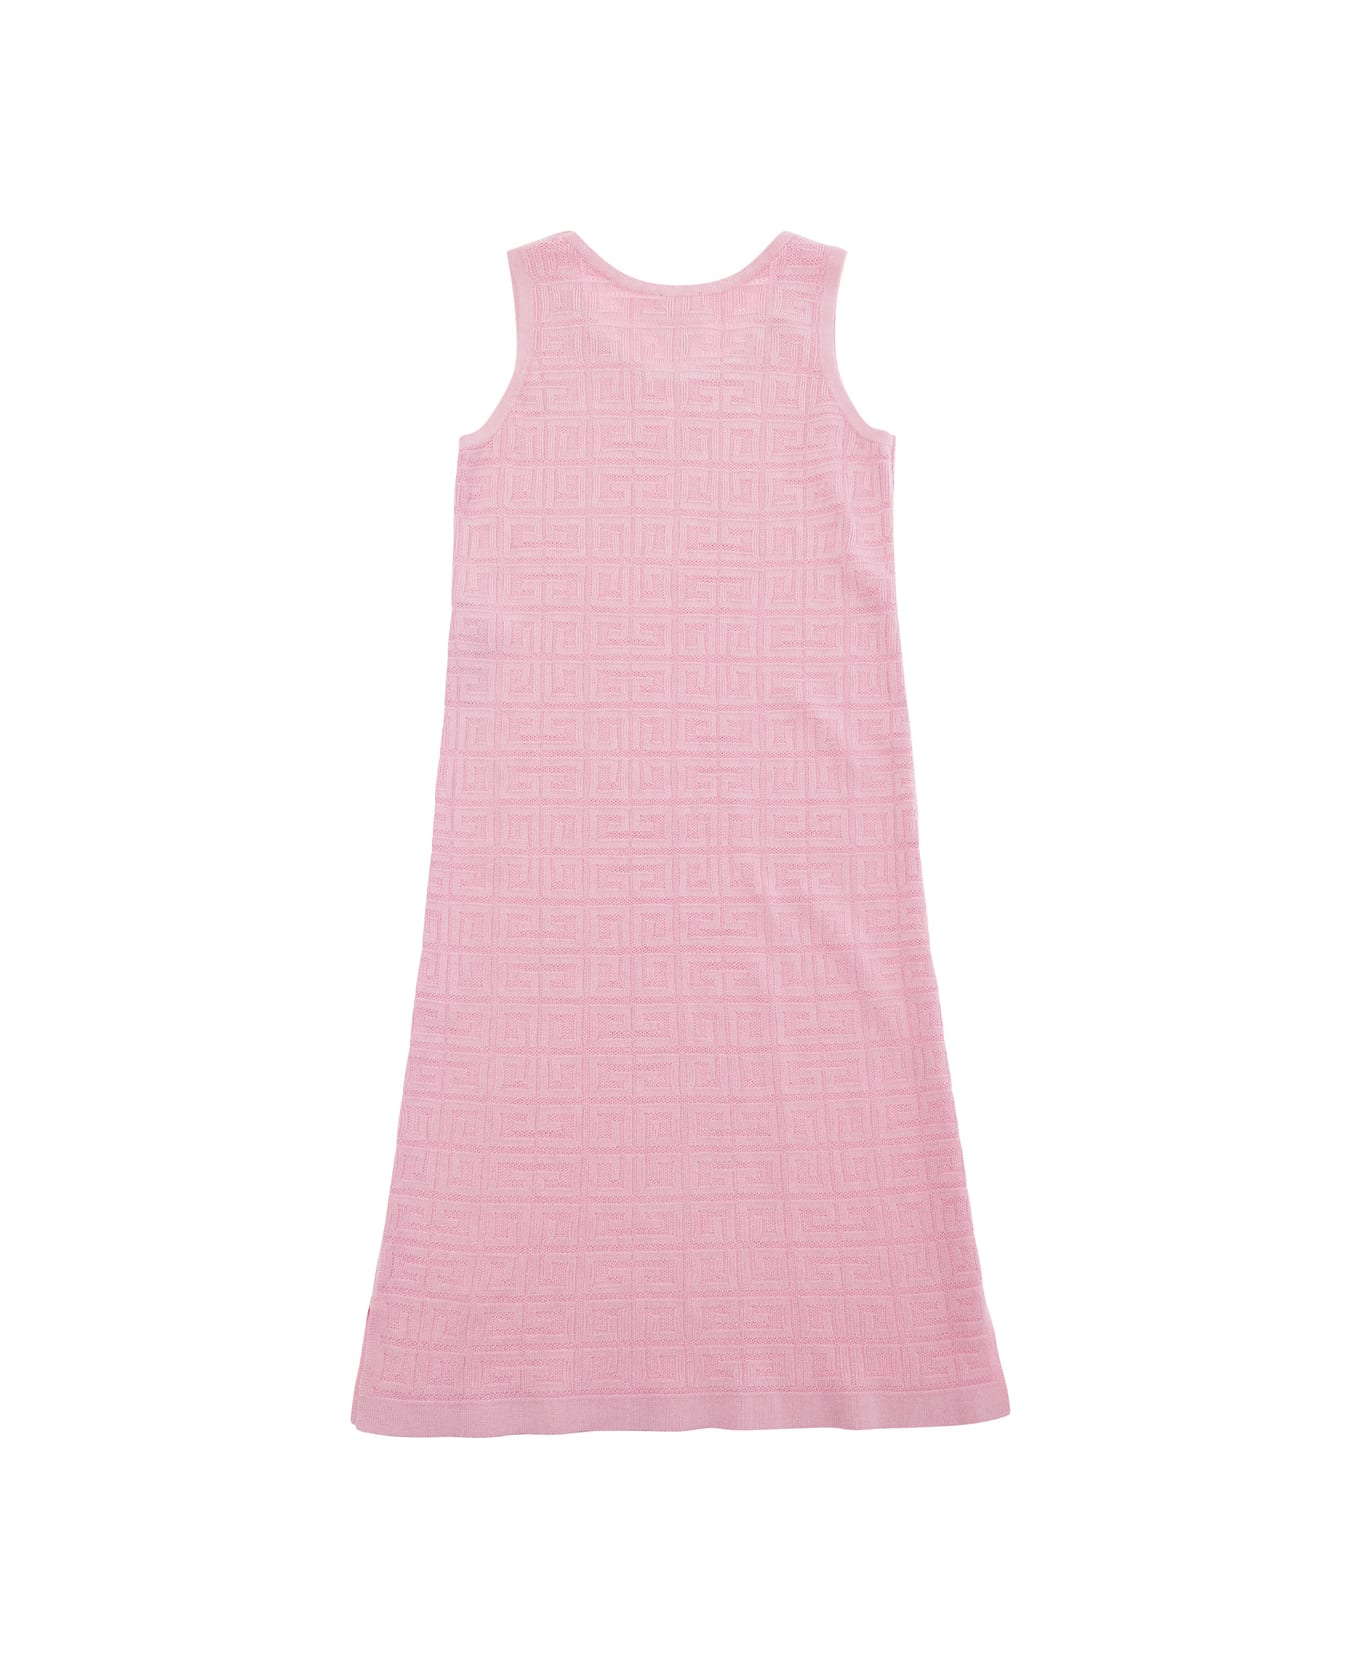 Givenchy Mini Pink Dress With All-over Gg Motif In Viscose Blend Girl - Pink